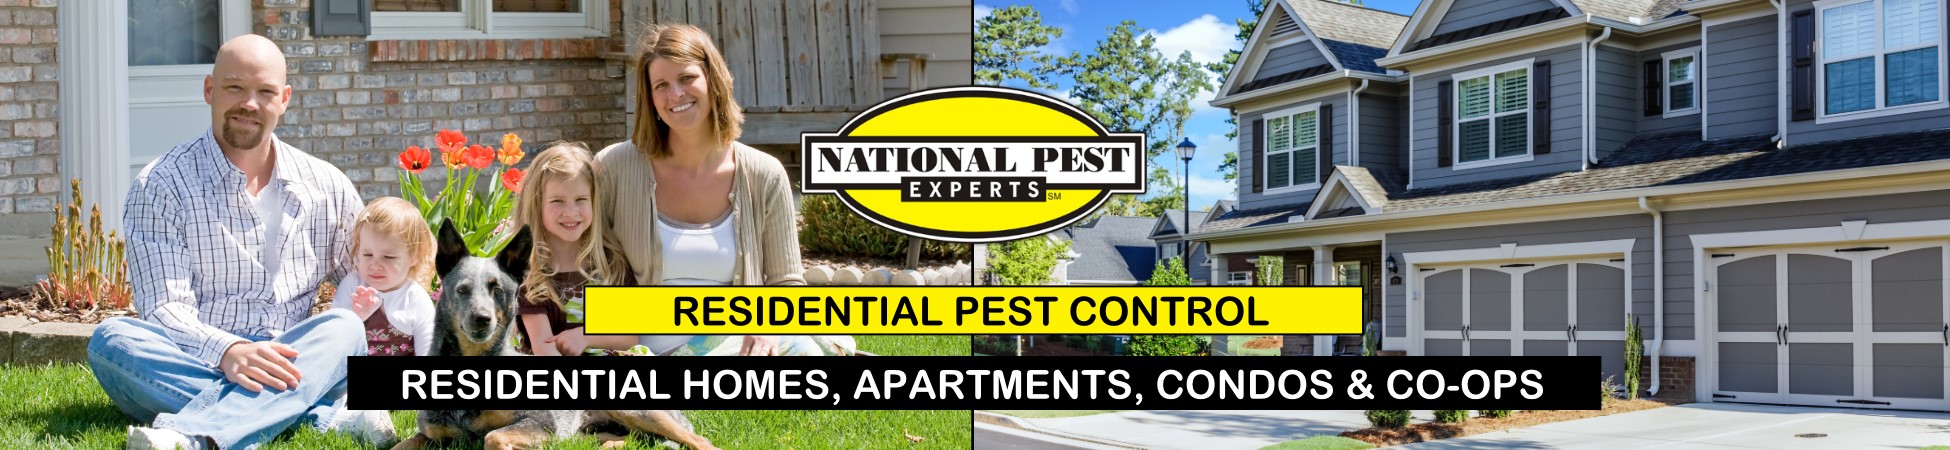 National Pest Experts - Residential exterminating and pest control in Centerport, NY